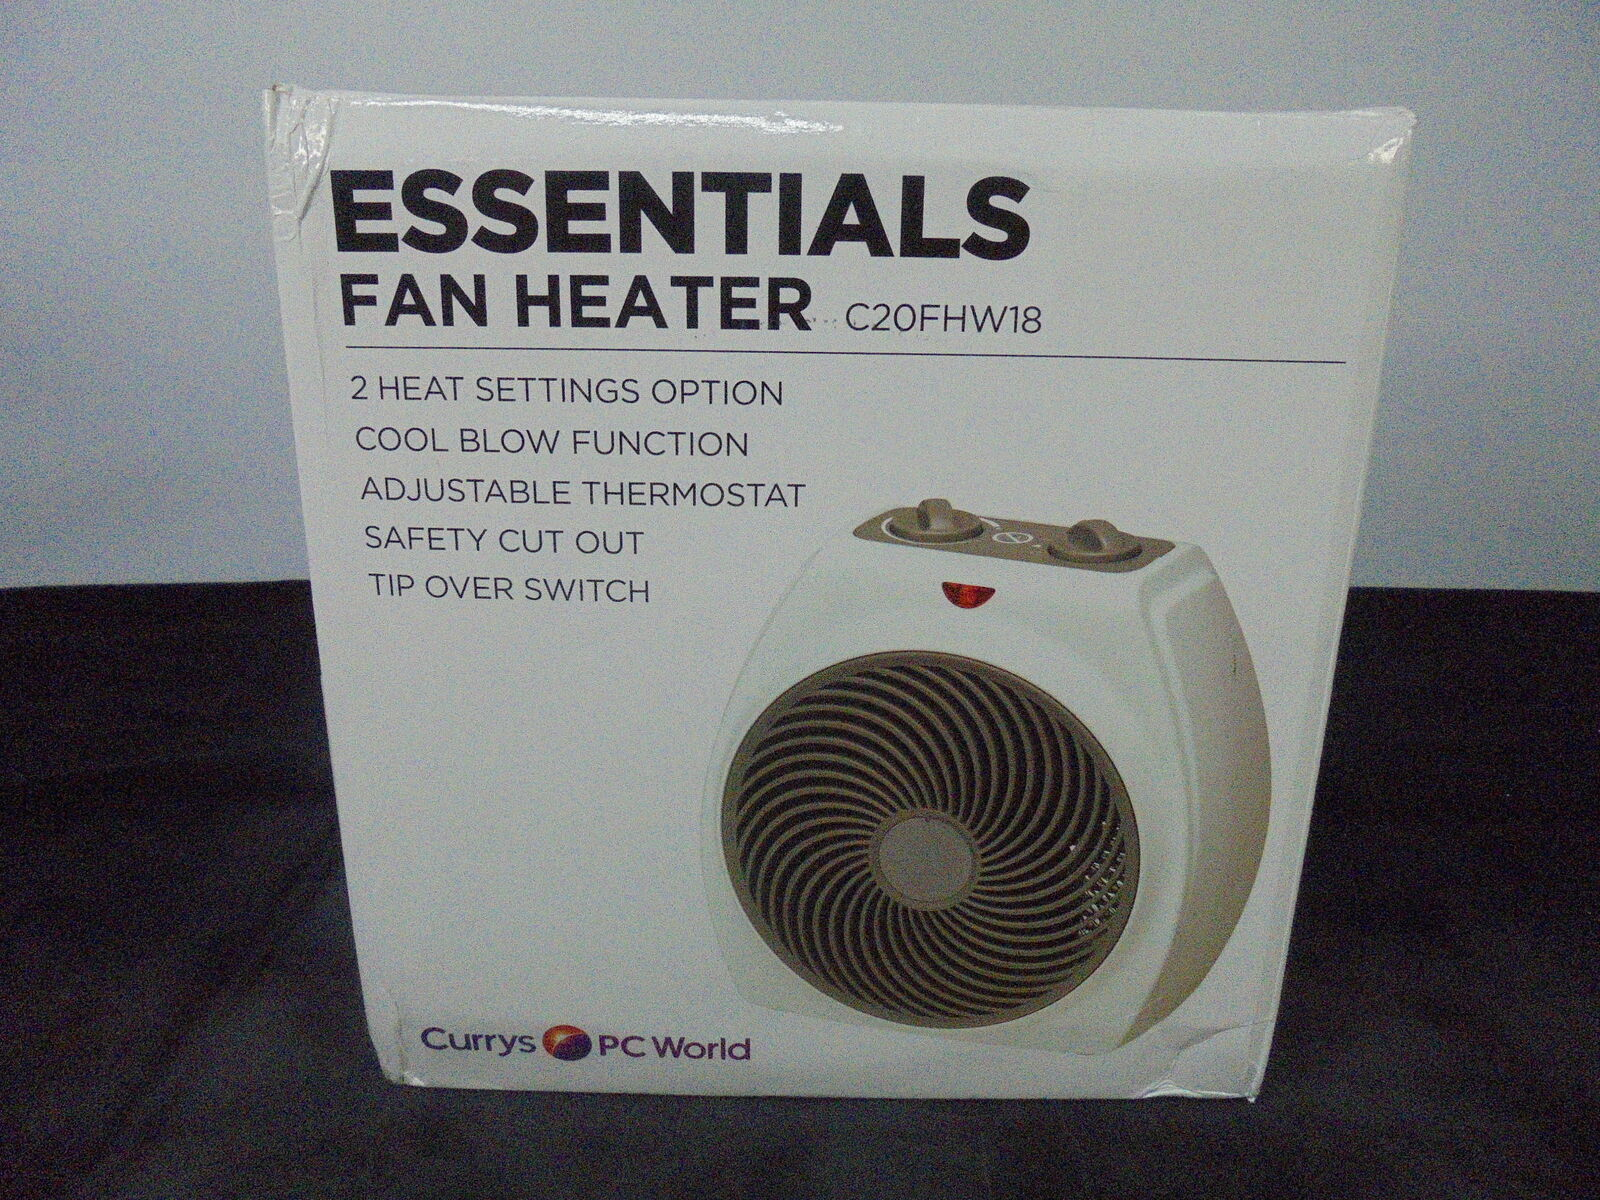 4 X Essentials C20fhw18 Portable Hot Cool Fan Heater White with regard to size 1600 X 1200